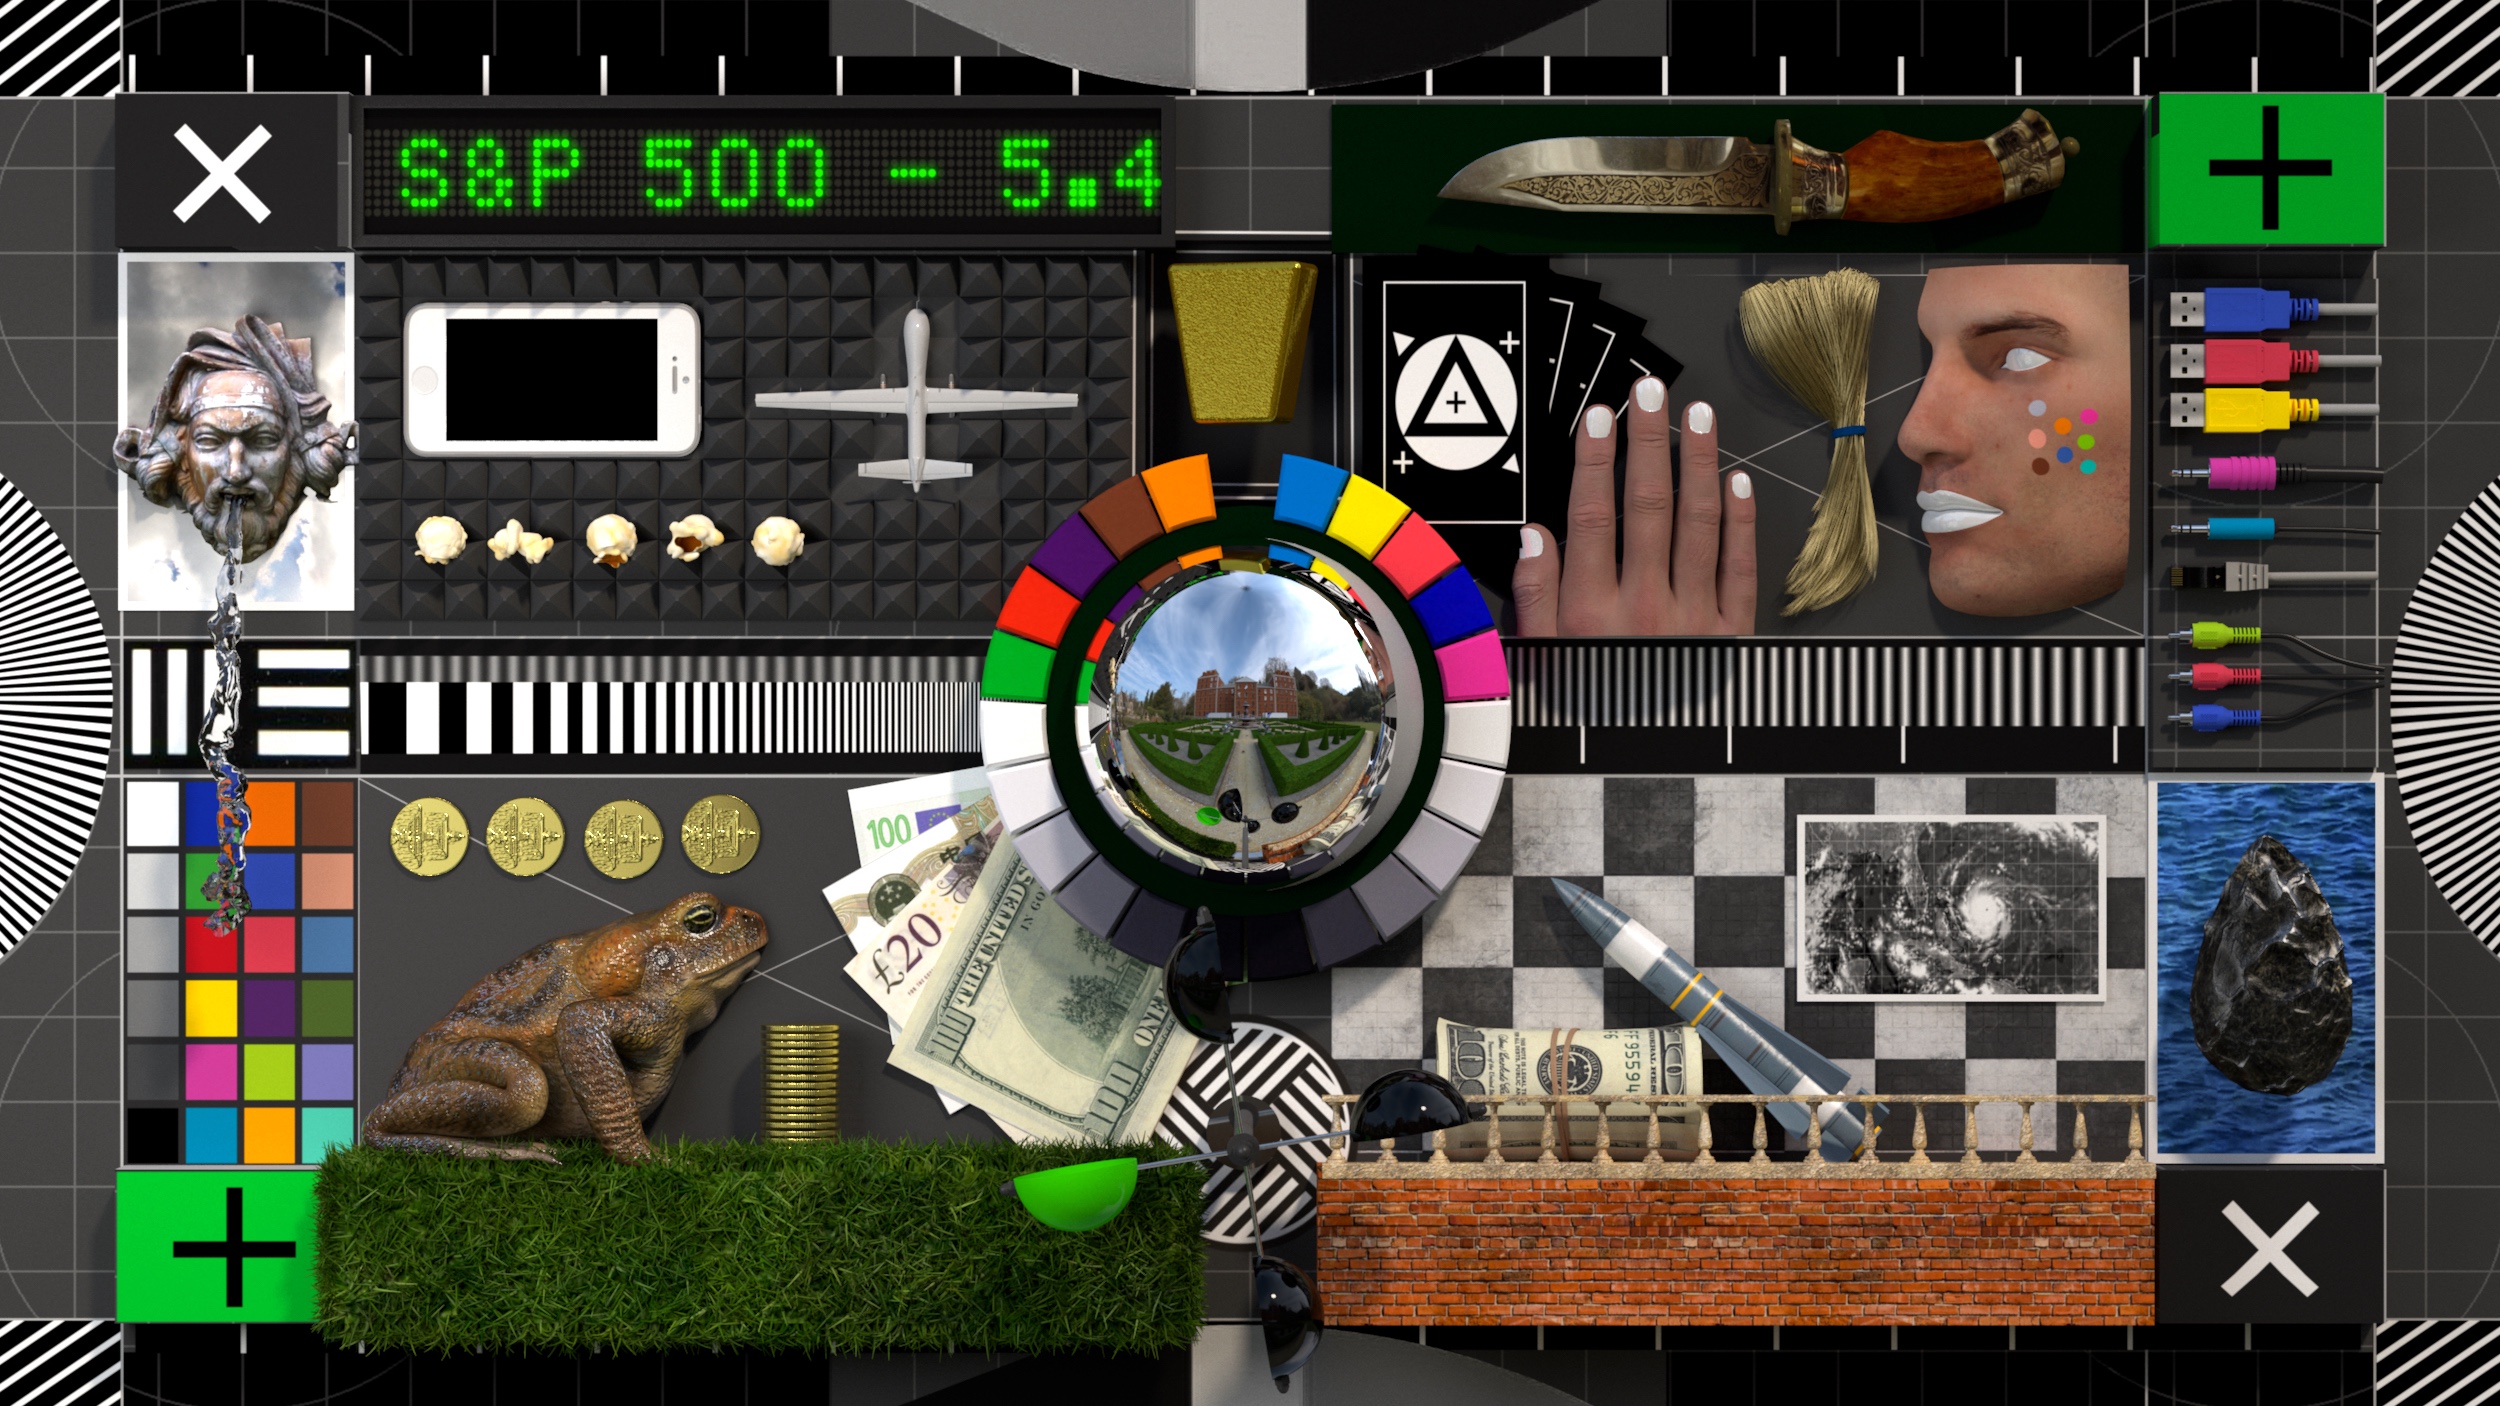 Decorated screen test card